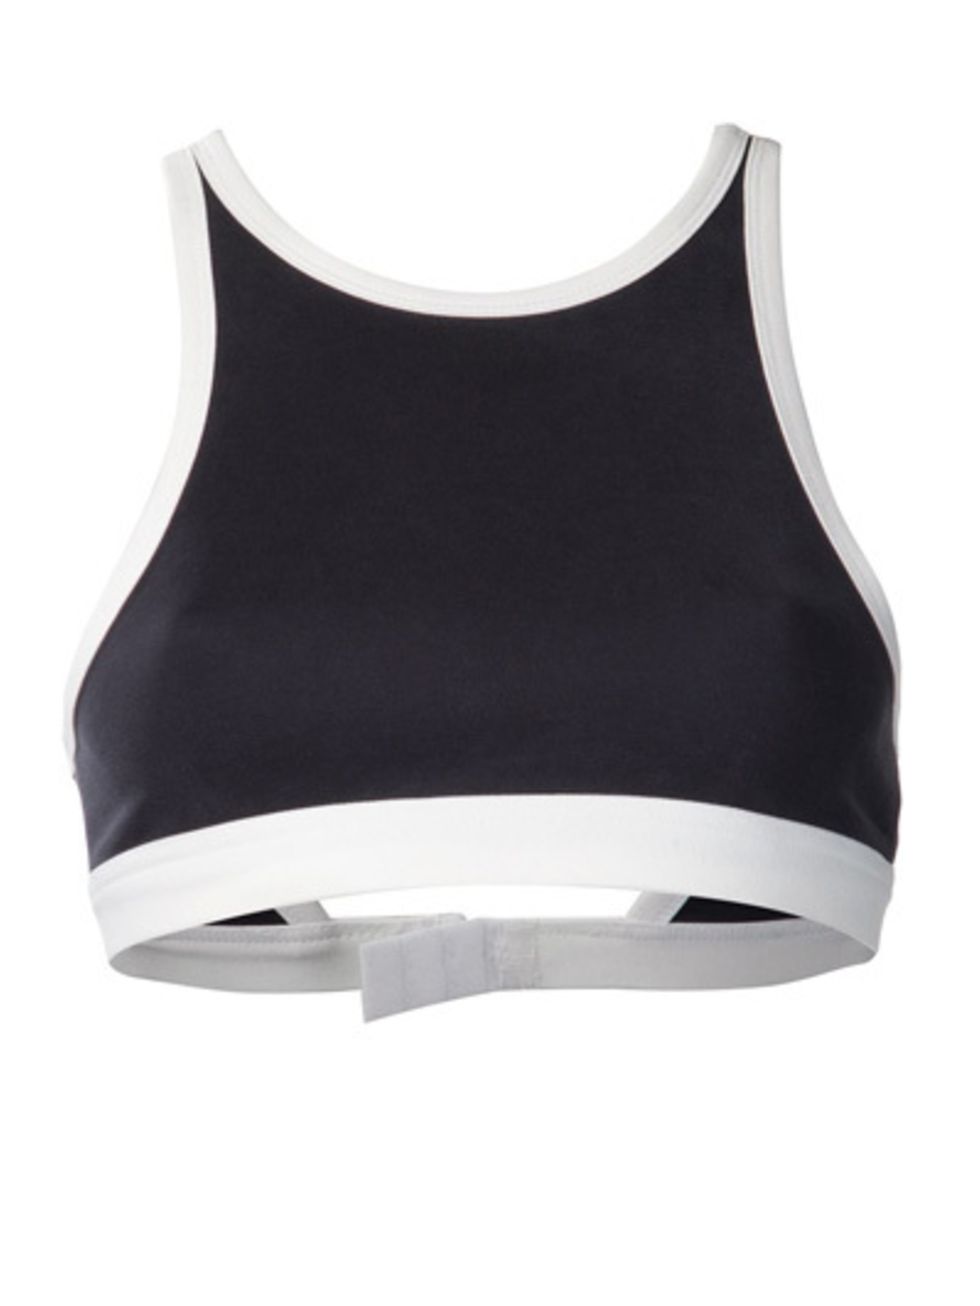 Product, White, Black, Grey, Silver, Active tank, Lighting accessory, 